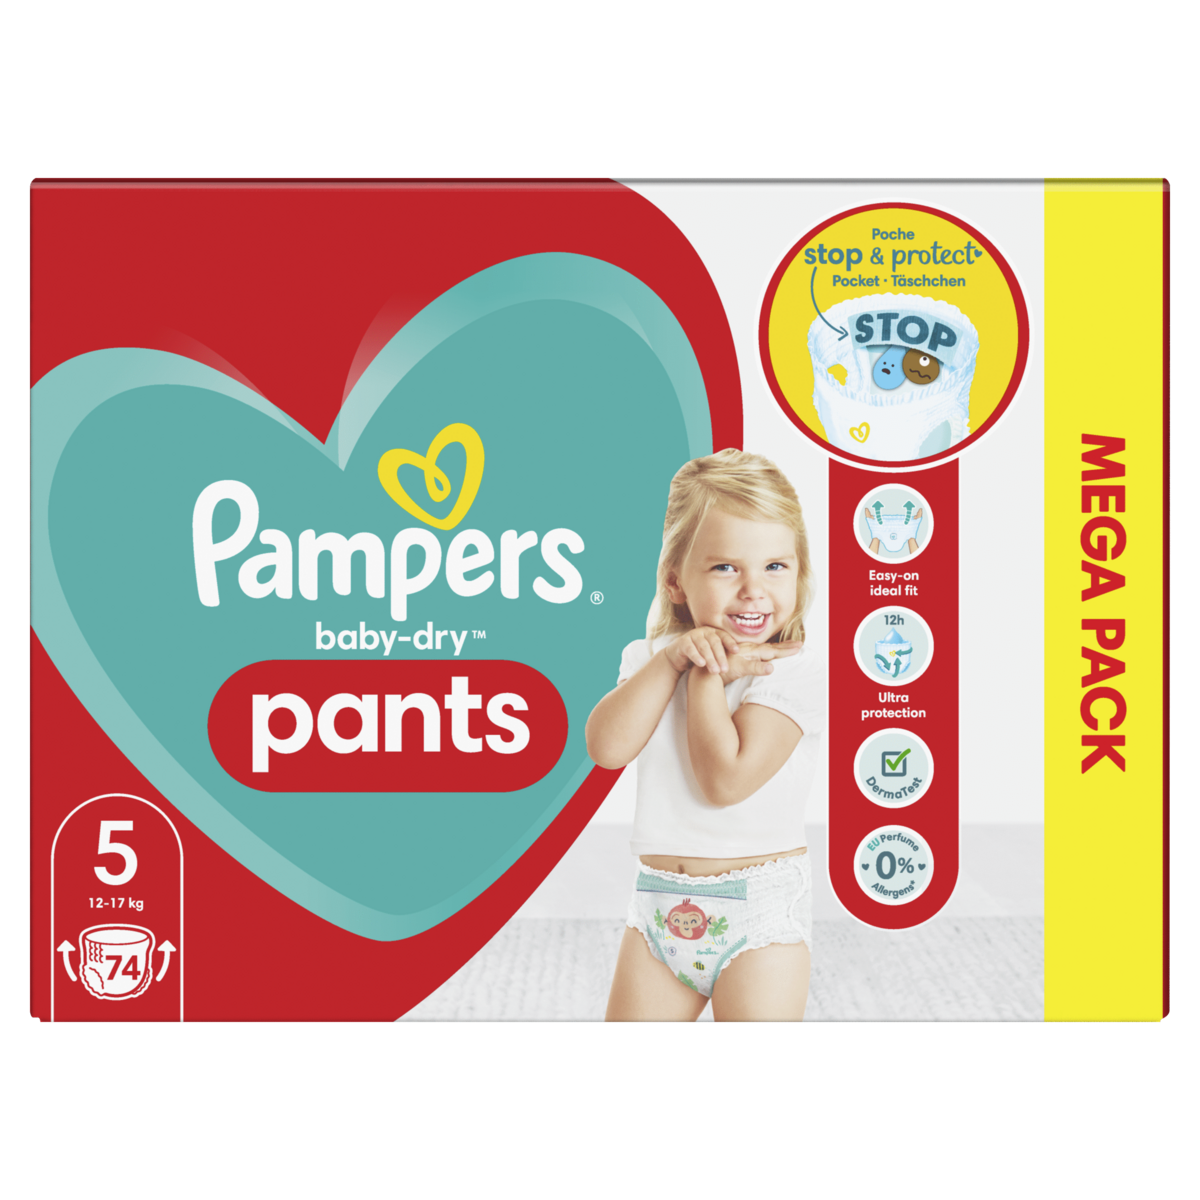 Mega Pack 78 Couches PAMPERS Baby-Dry Taille 5 (11 à 16 KG) Lot